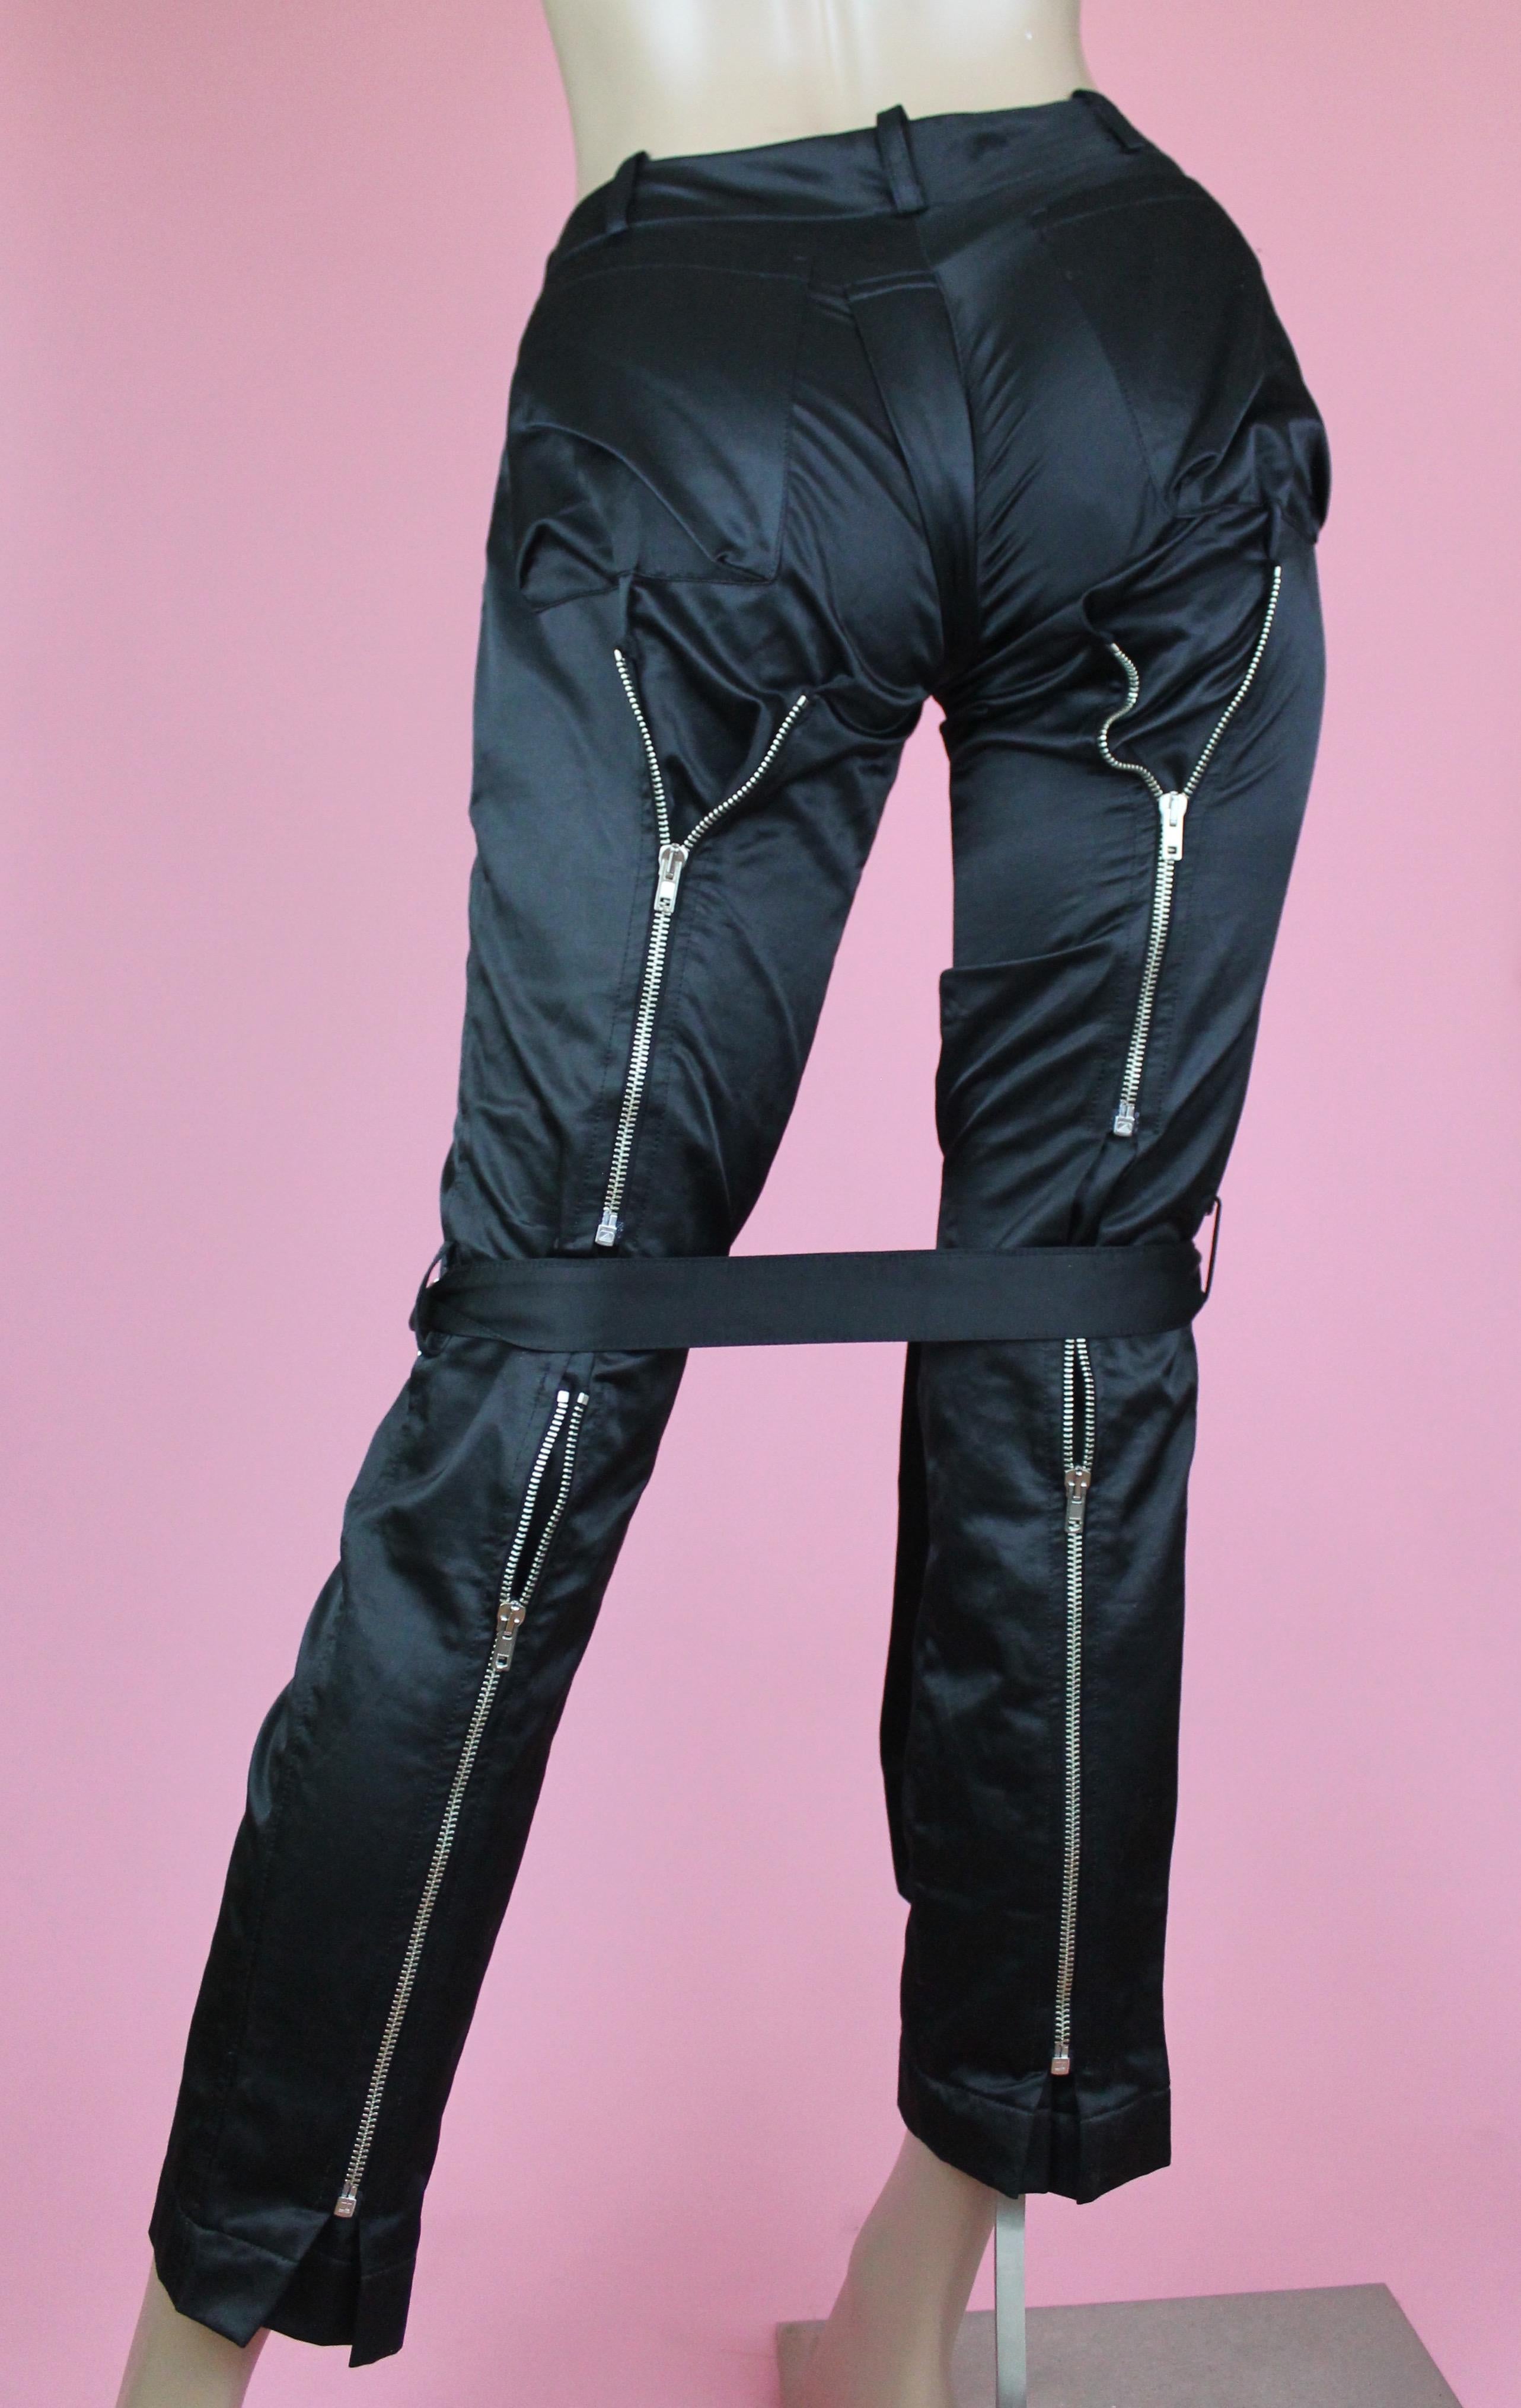 -Vivienne Westwood Bondage Trousers, a Seditionaries reissue from 1976, reinterpreted for the 2000's market. 
-From the Anglomania division
-Zips from the crotch all the way to the butt
-Cotton satin blend fabric, has sheen 
-Has zippers on the back